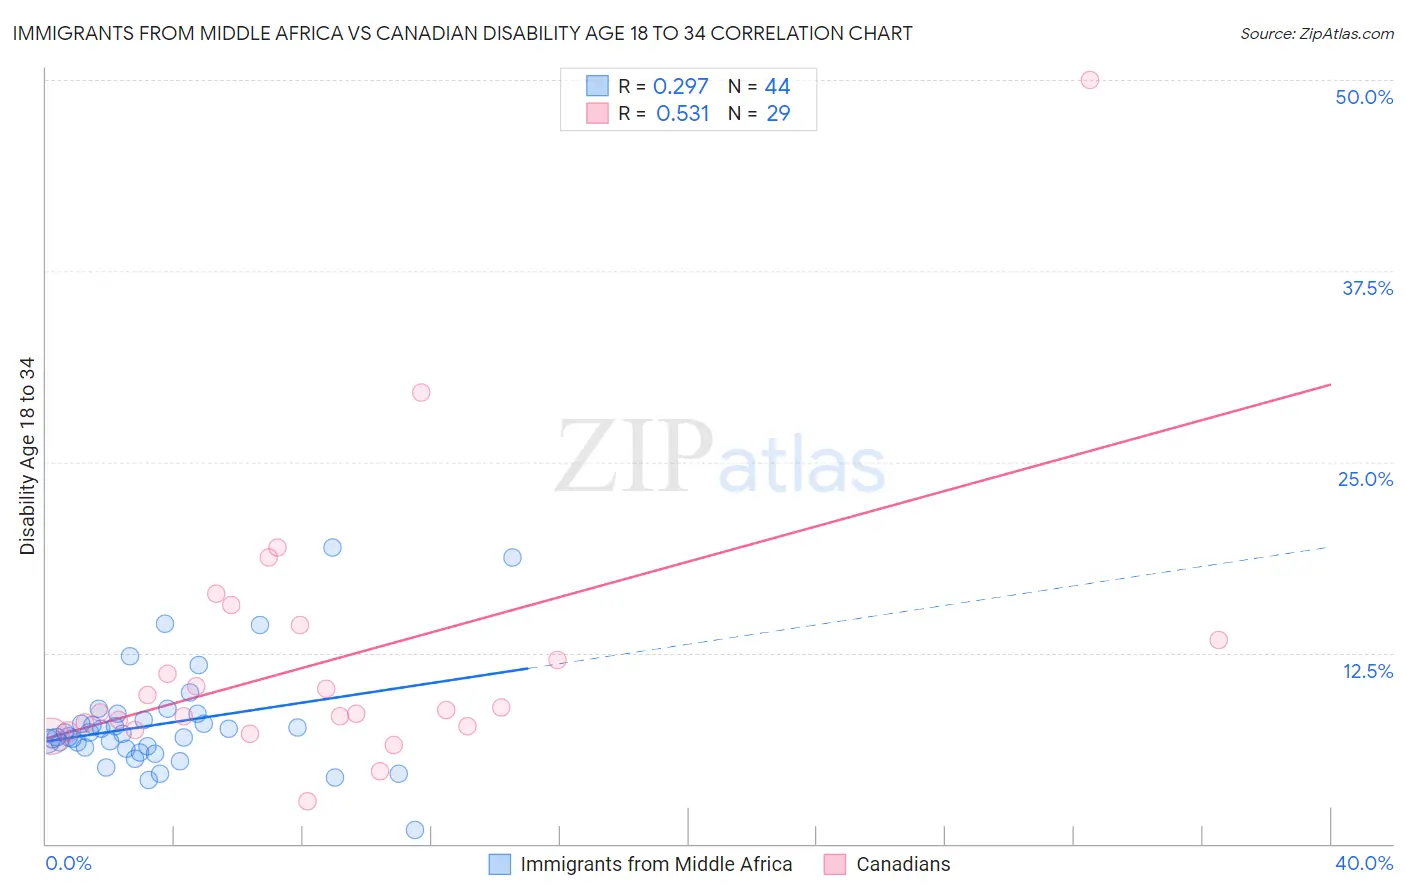 Immigrants from Middle Africa vs Canadian Disability Age 18 to 34